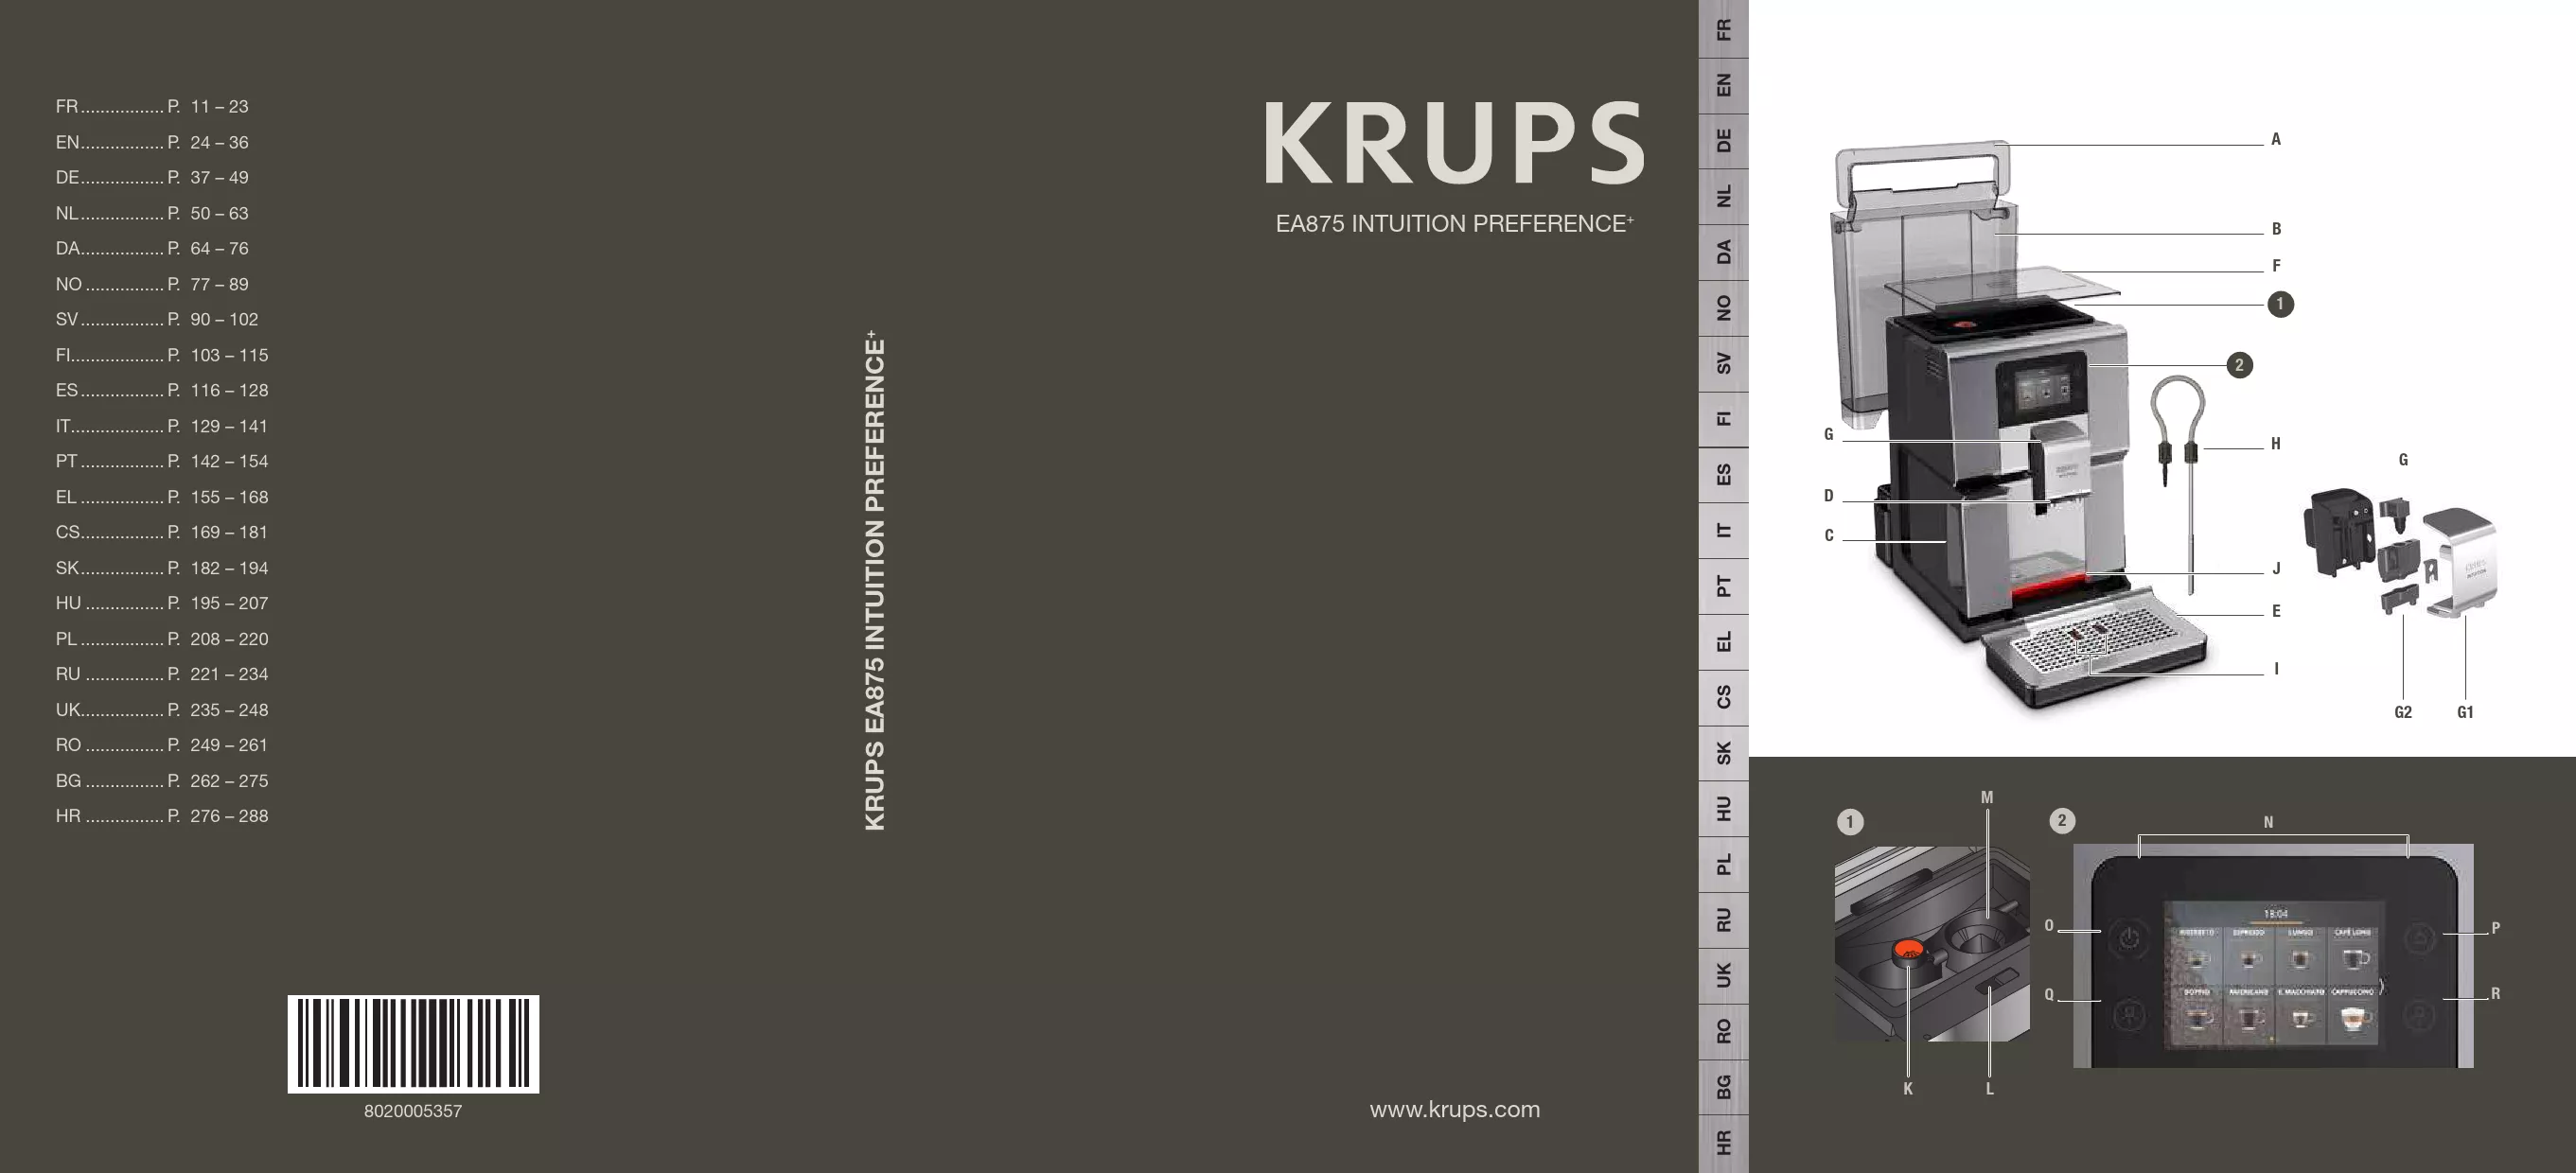 Mode d'emploi KRUPS INTUITION PREFERENCE EA873810